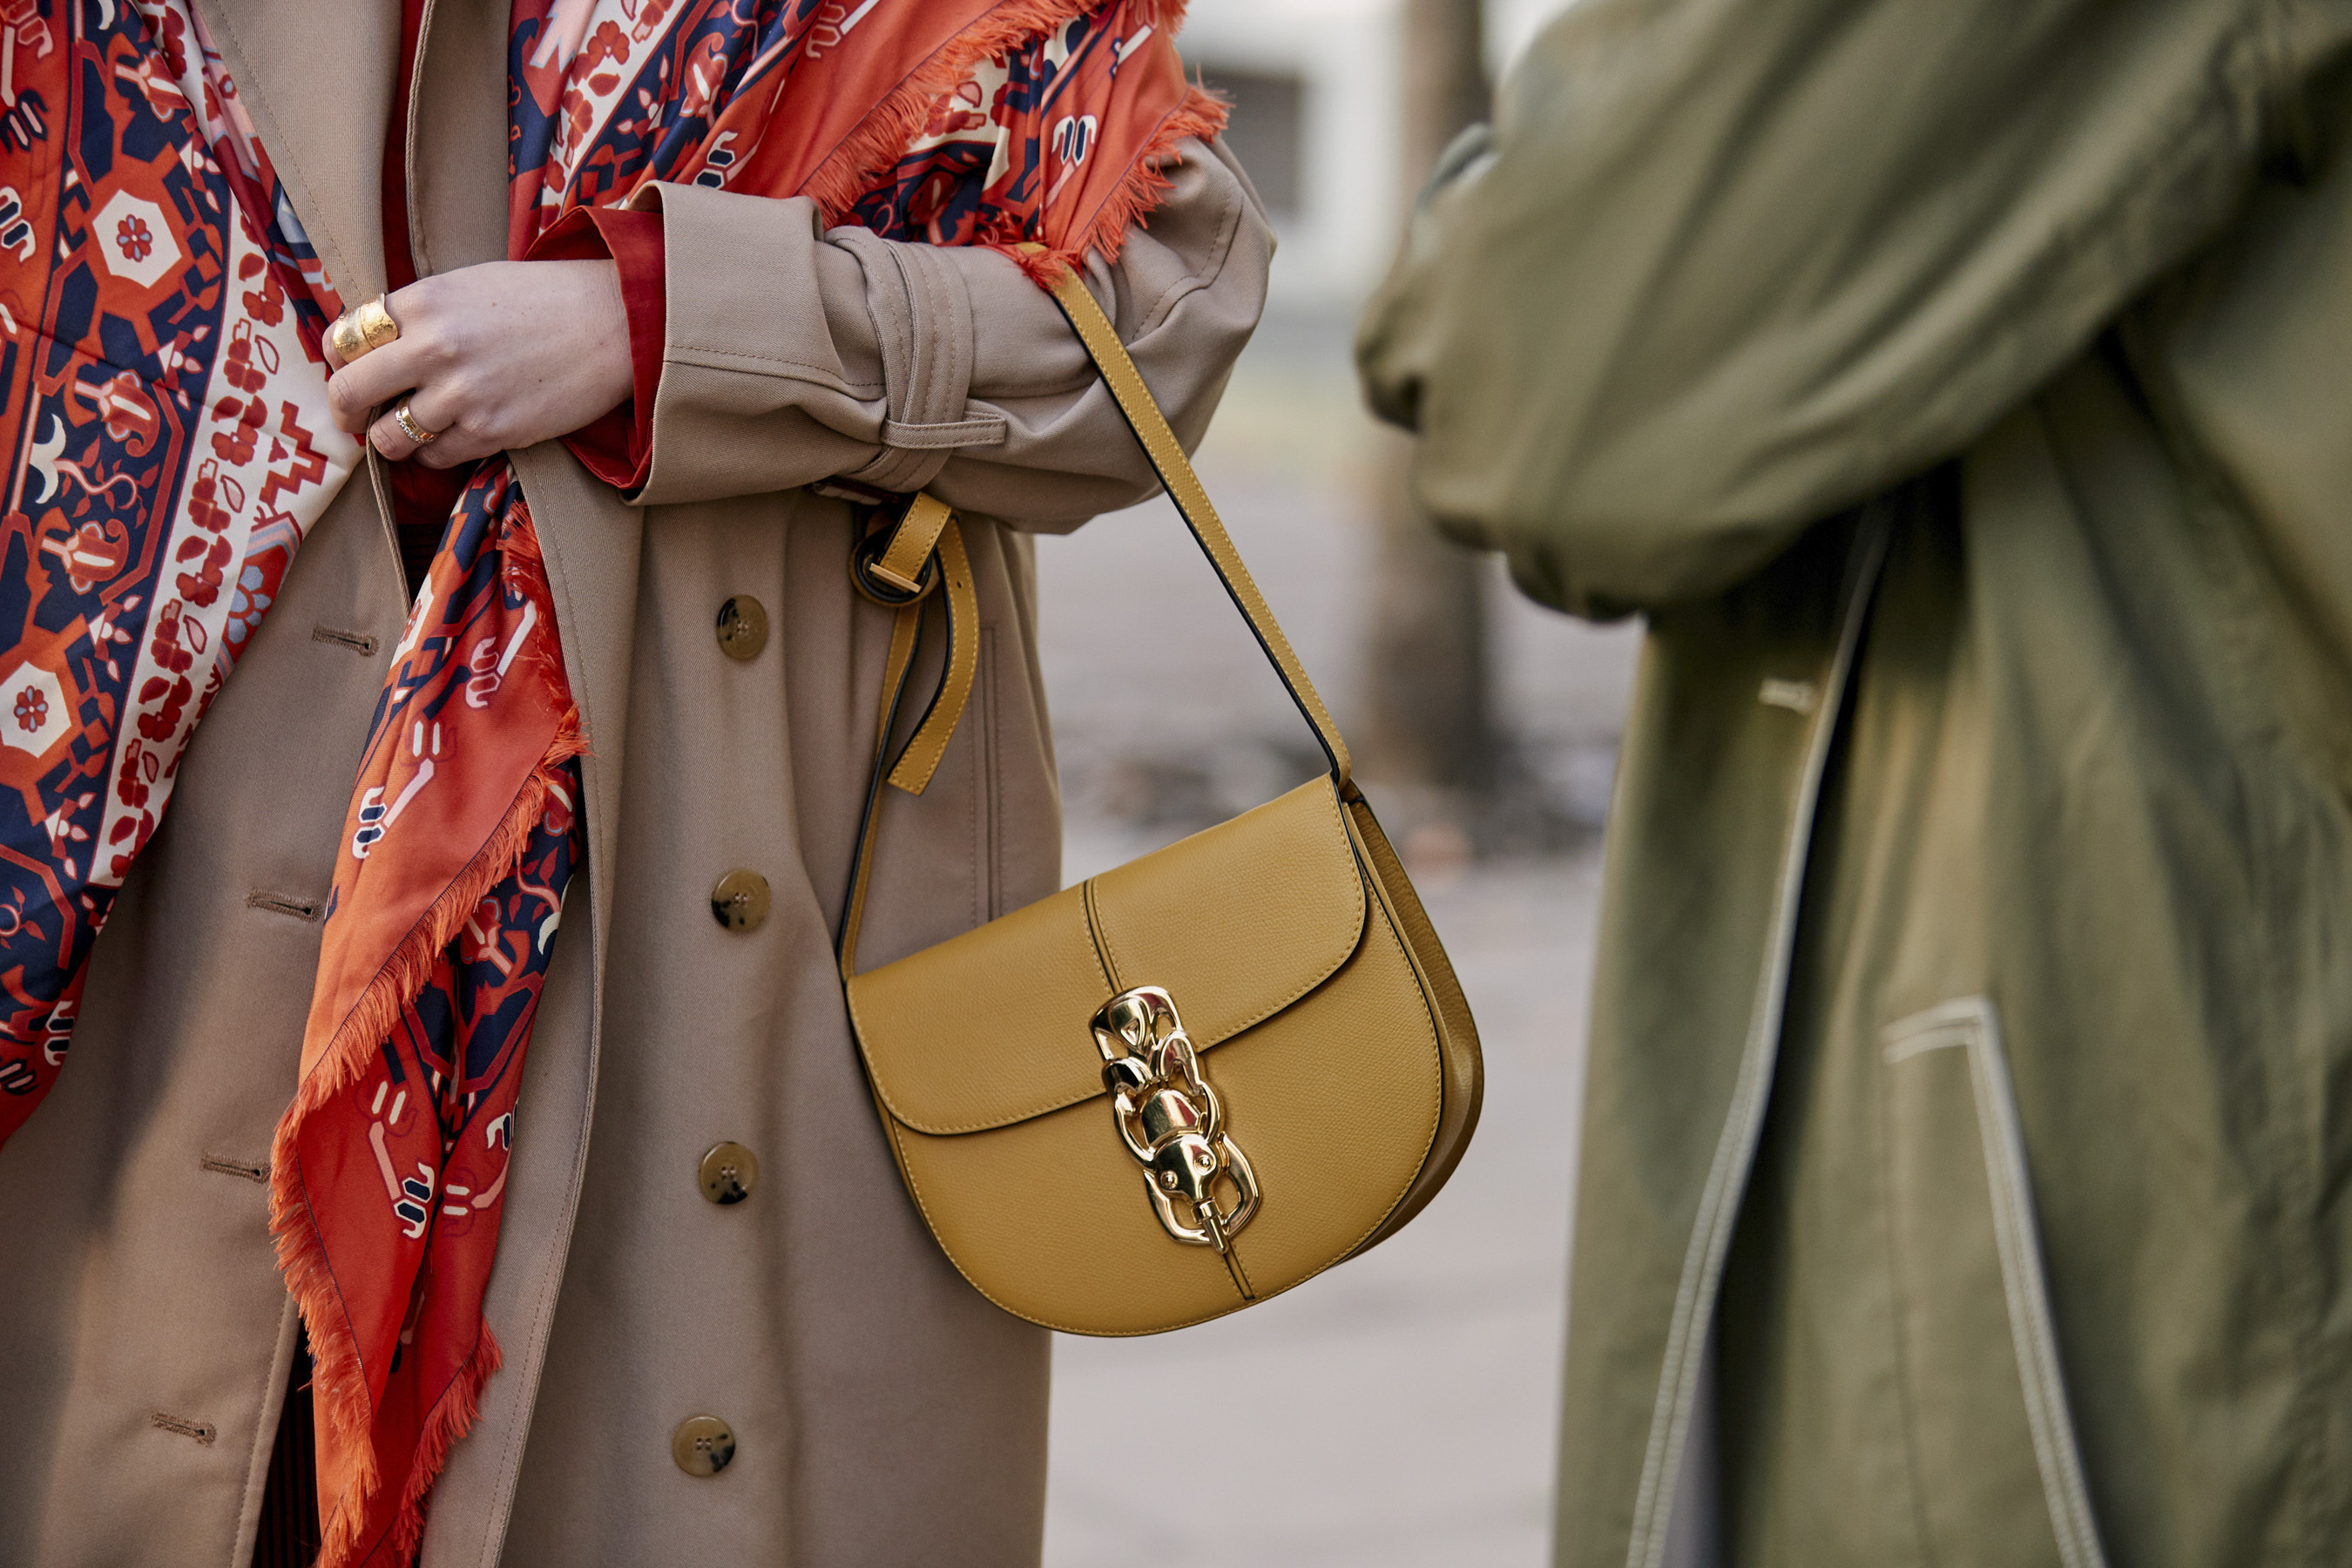 London Fashion Week Street Style Fall 2019 Day 5 Accessories | The ...